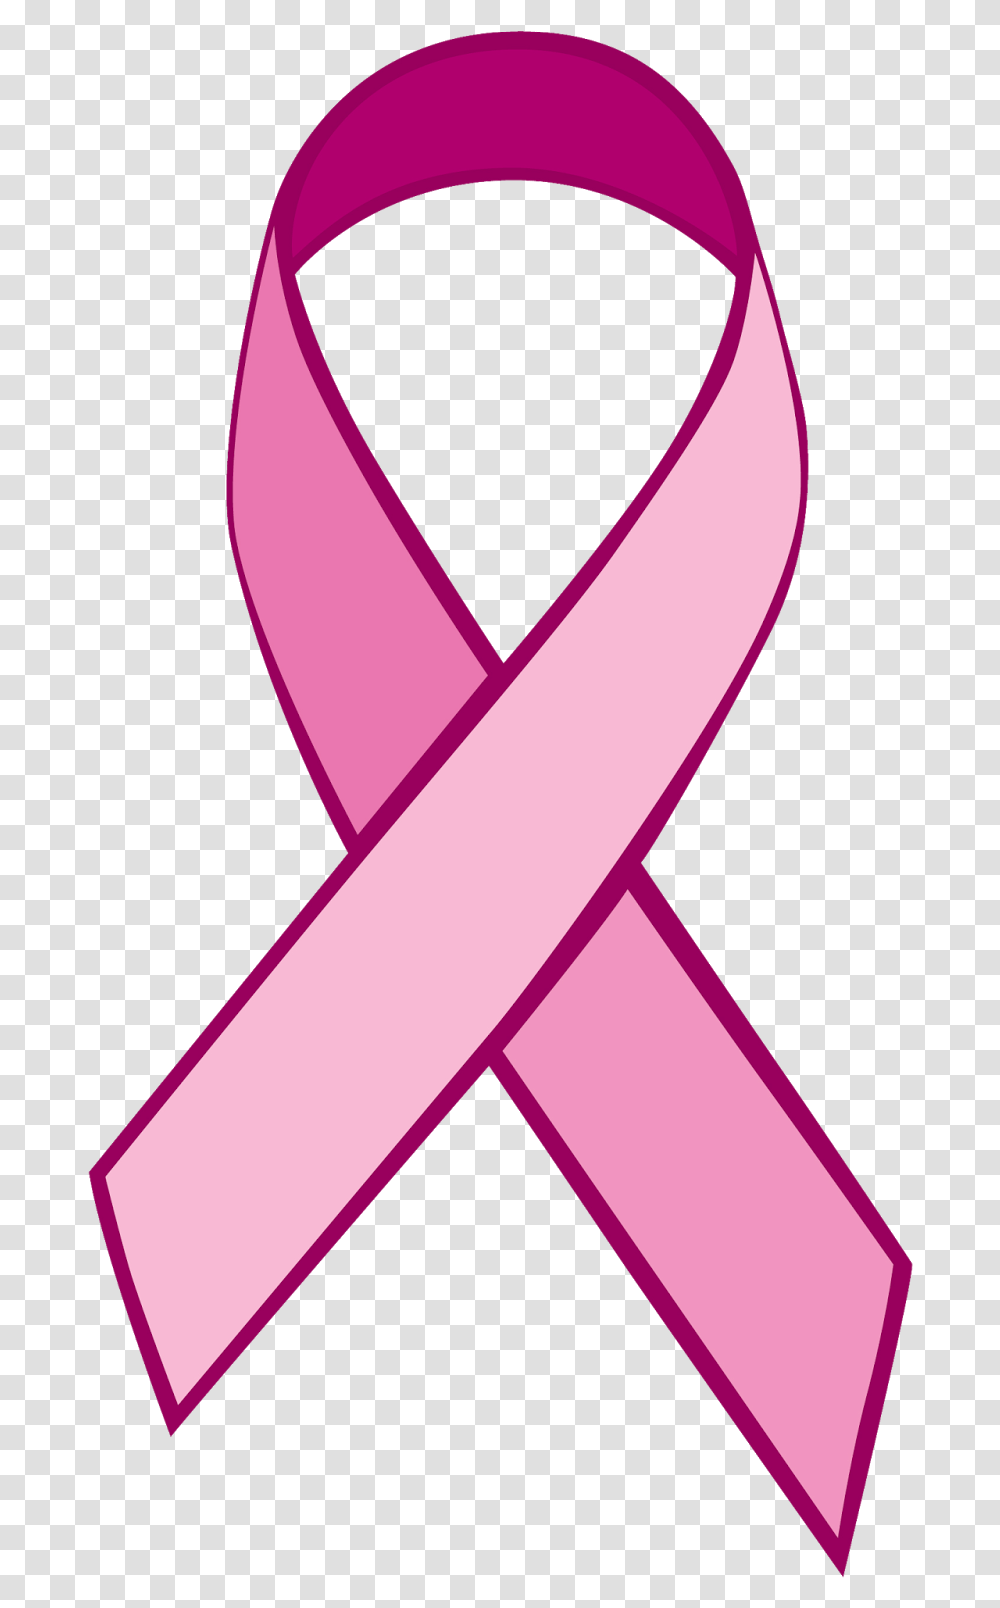 Download Cancer Image Breast Cancer Awareness Month Breast Cancer Awareness Month Ribbon, Purple, Sash, Tie, Accessories Transparent Png